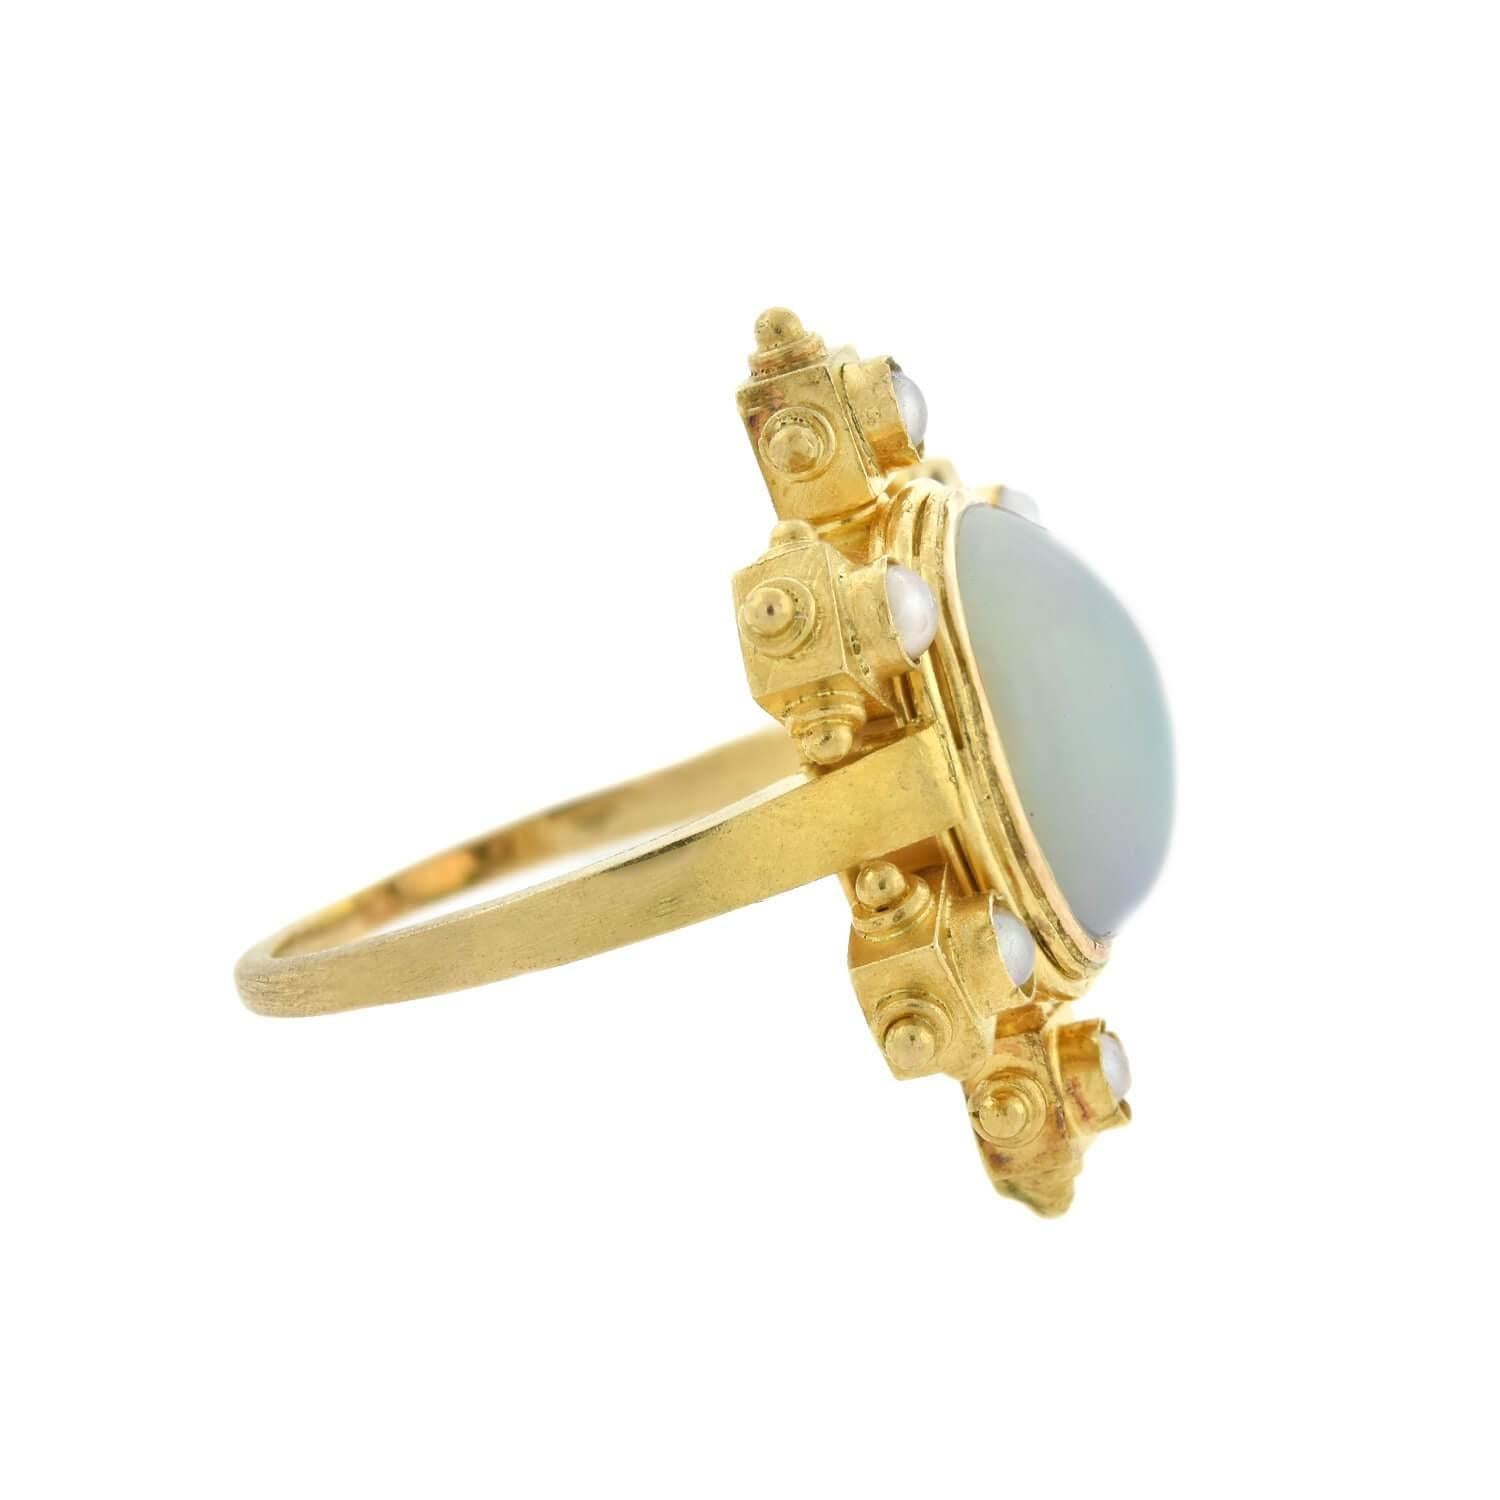 A stunning ring from the Victorian (ca1880s) era! Crafted in 14kt yellow gold, this ring displays a wonderful Architectural Revival design. Six lustrous white pearls rest in crimped bezel settings atop embellished architectural accents. An